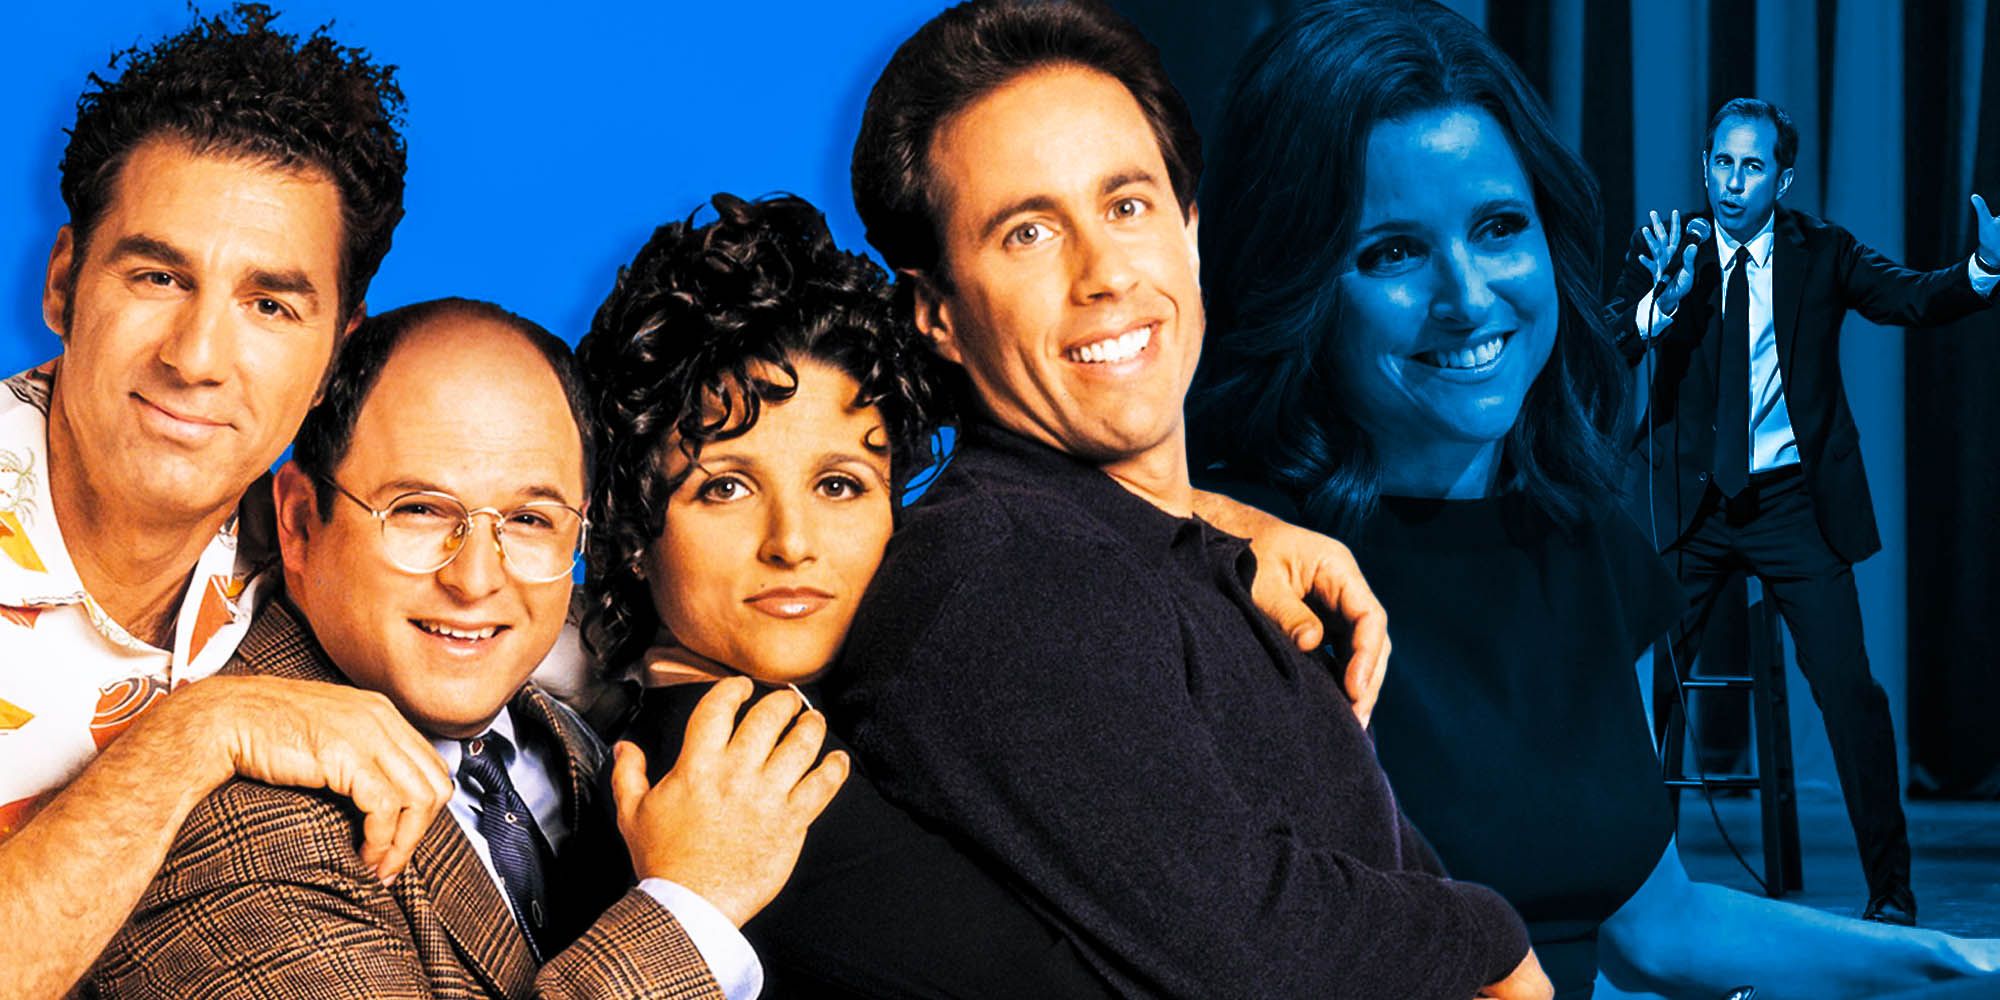 What The seinfeld Main Cast Has Done Since The Show Ended Veep julia louis Dreyfus Jerry seinfeld